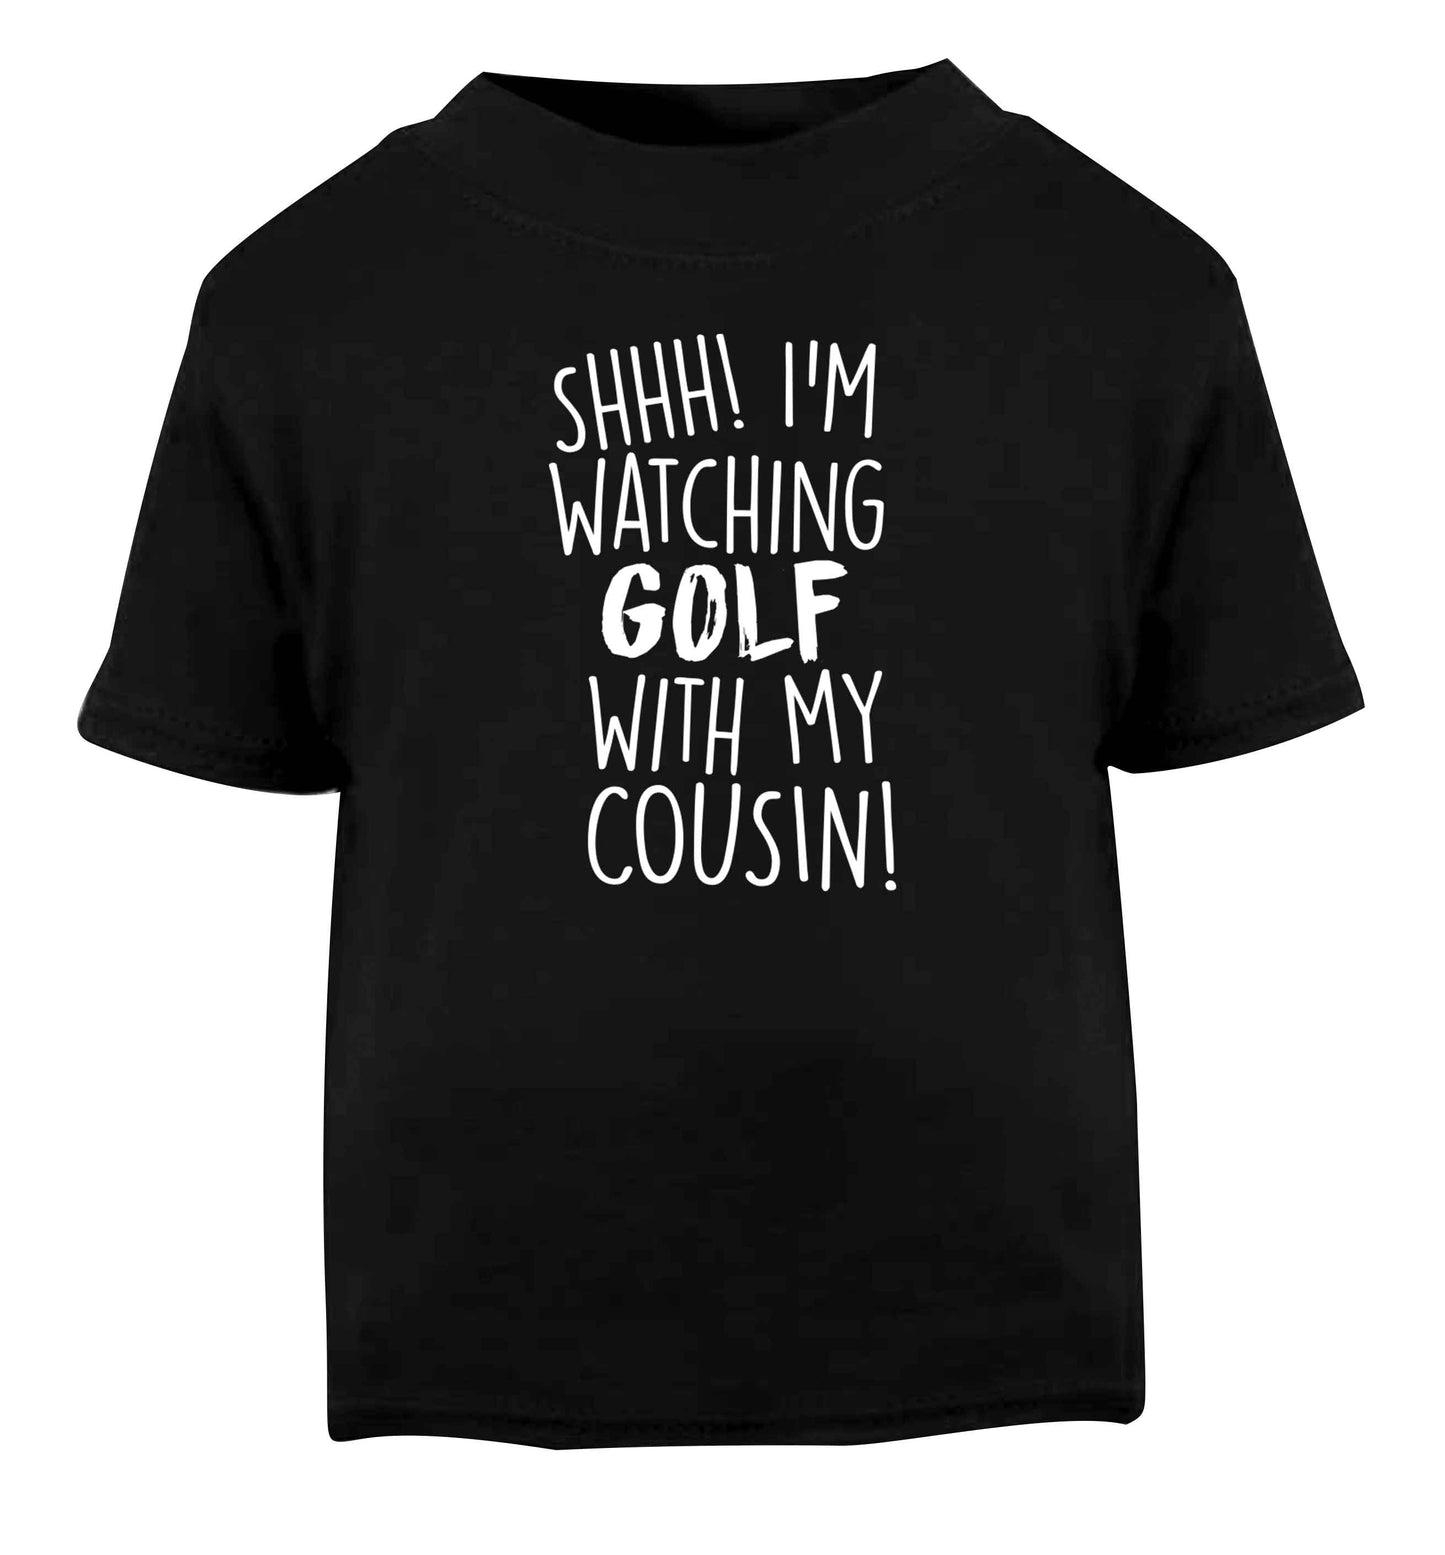 Shh I'm watching golf with my cousin Black Baby Toddler Tshirt 2 years